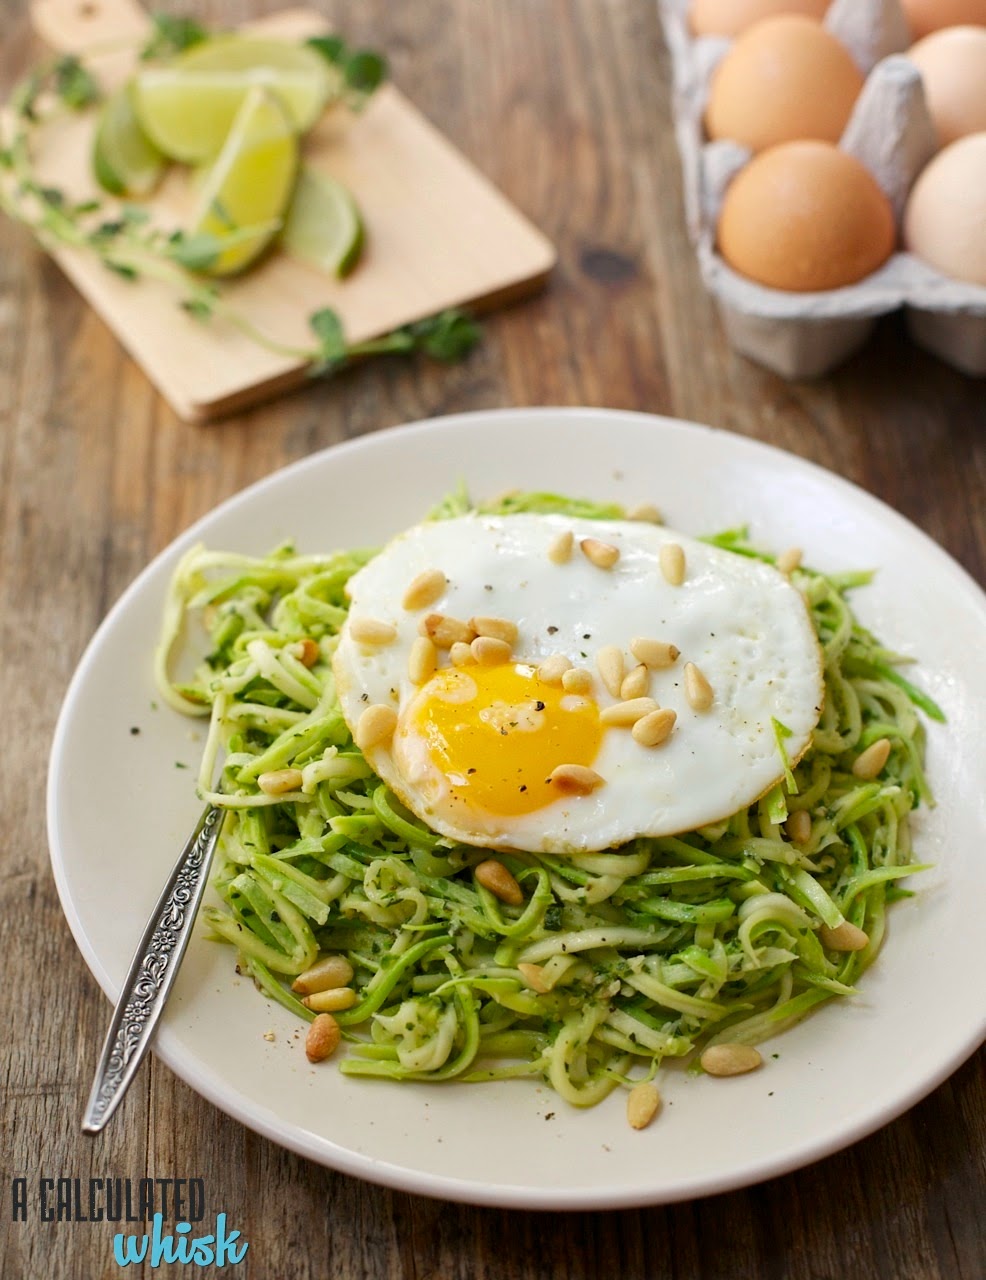 Squash Noodles with Everything Pesto (and an egg on top)